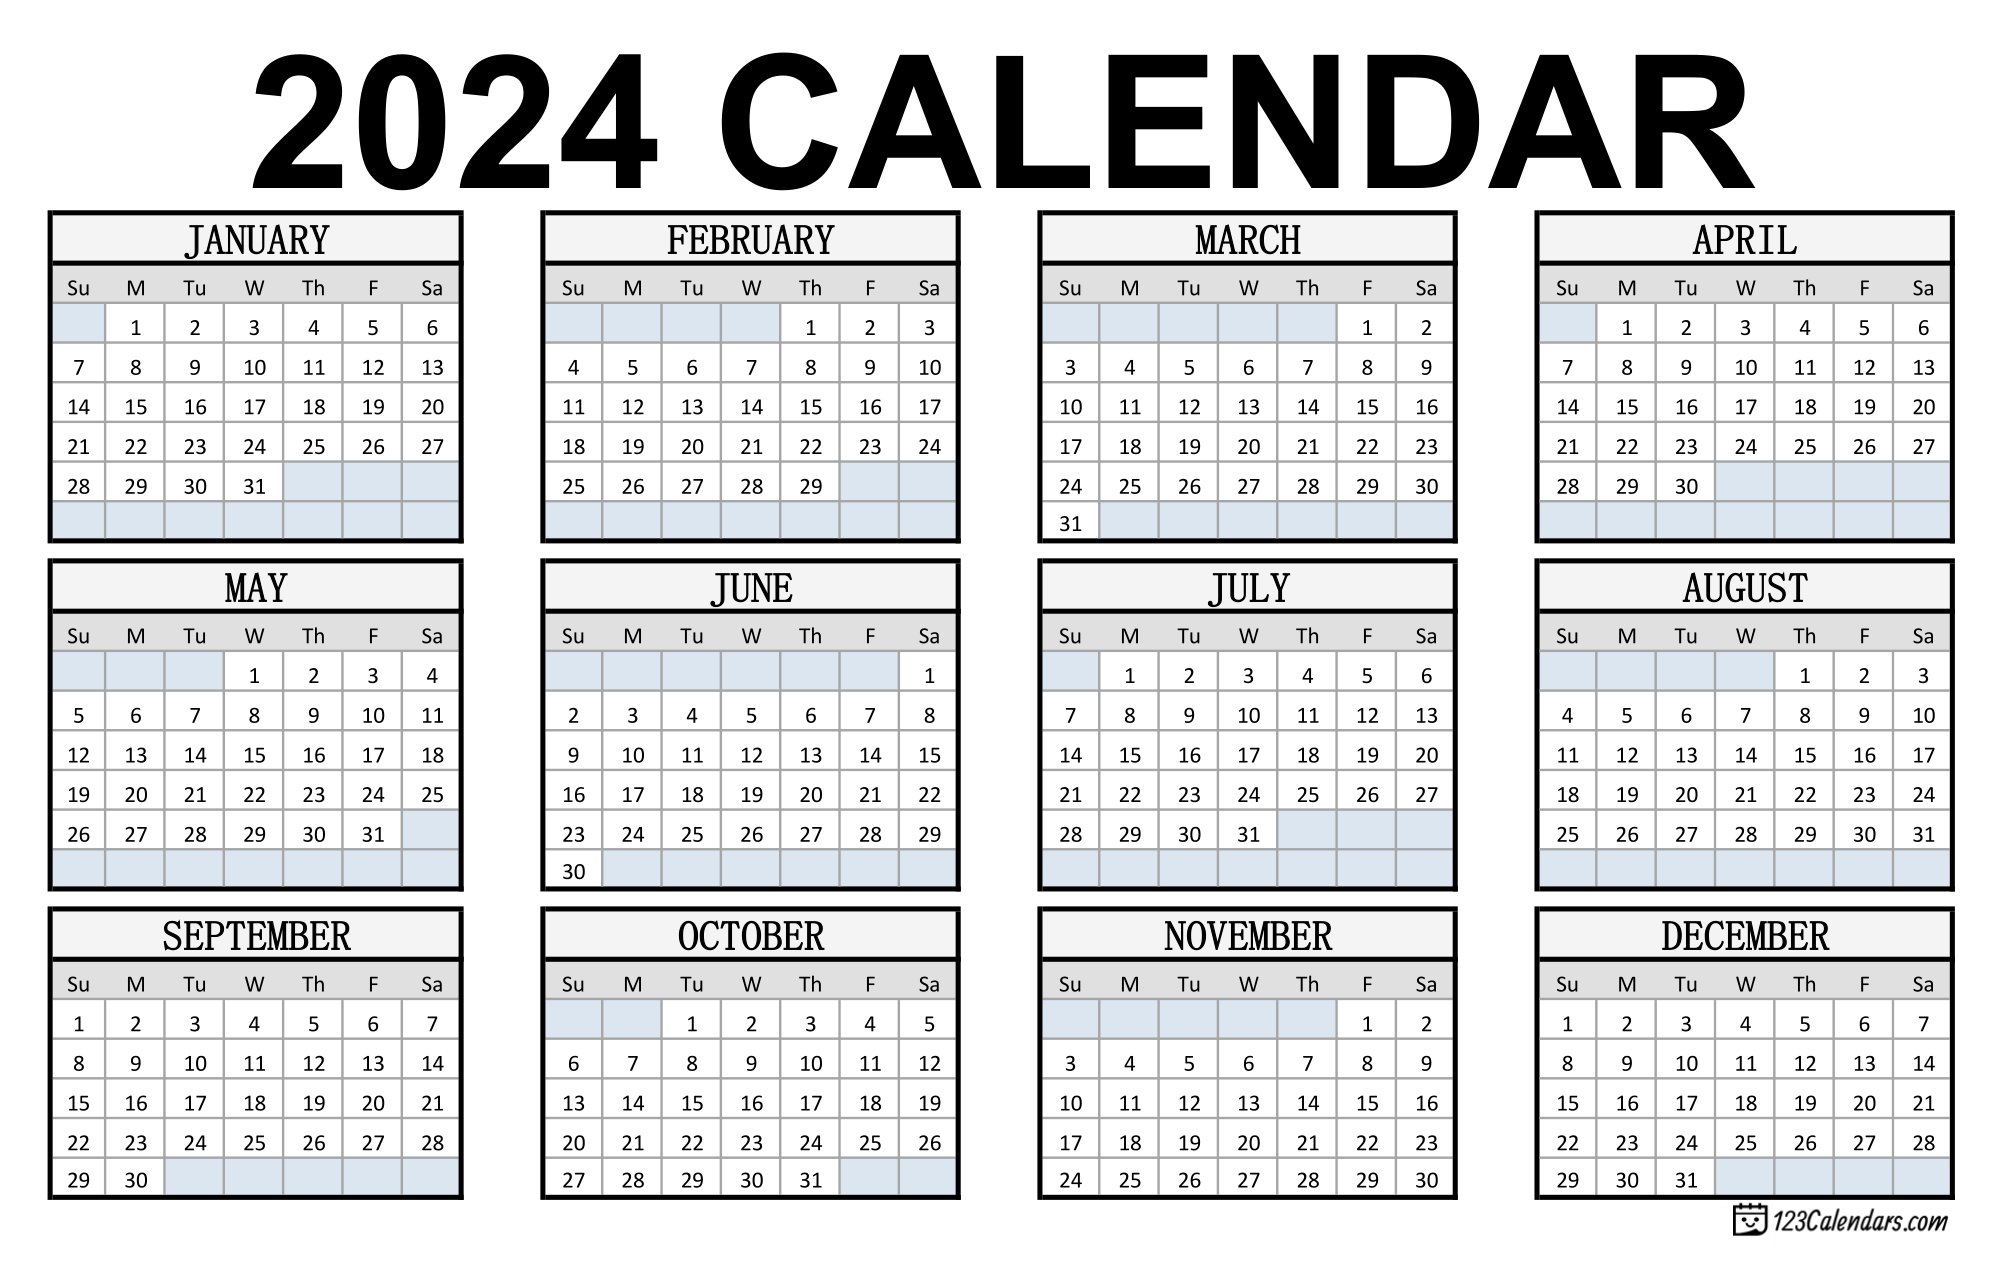 Philippine Calendar 2024 With Holidays Printable Pdf Free Download